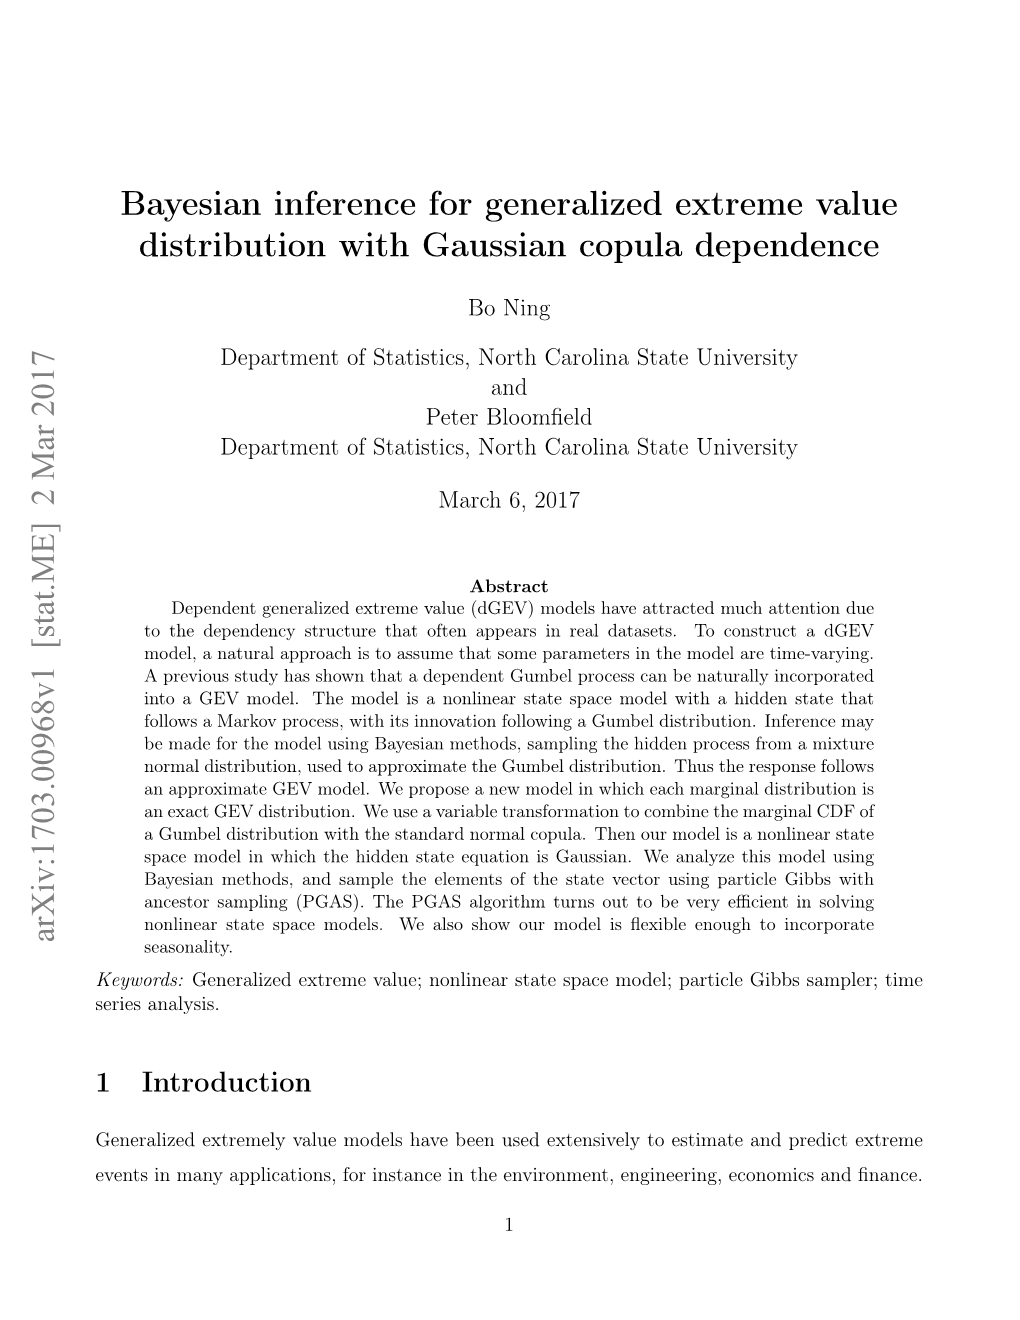 Bayesian Inference for Generalized Extreme Value Distribution with Gaussian Copula Dependence